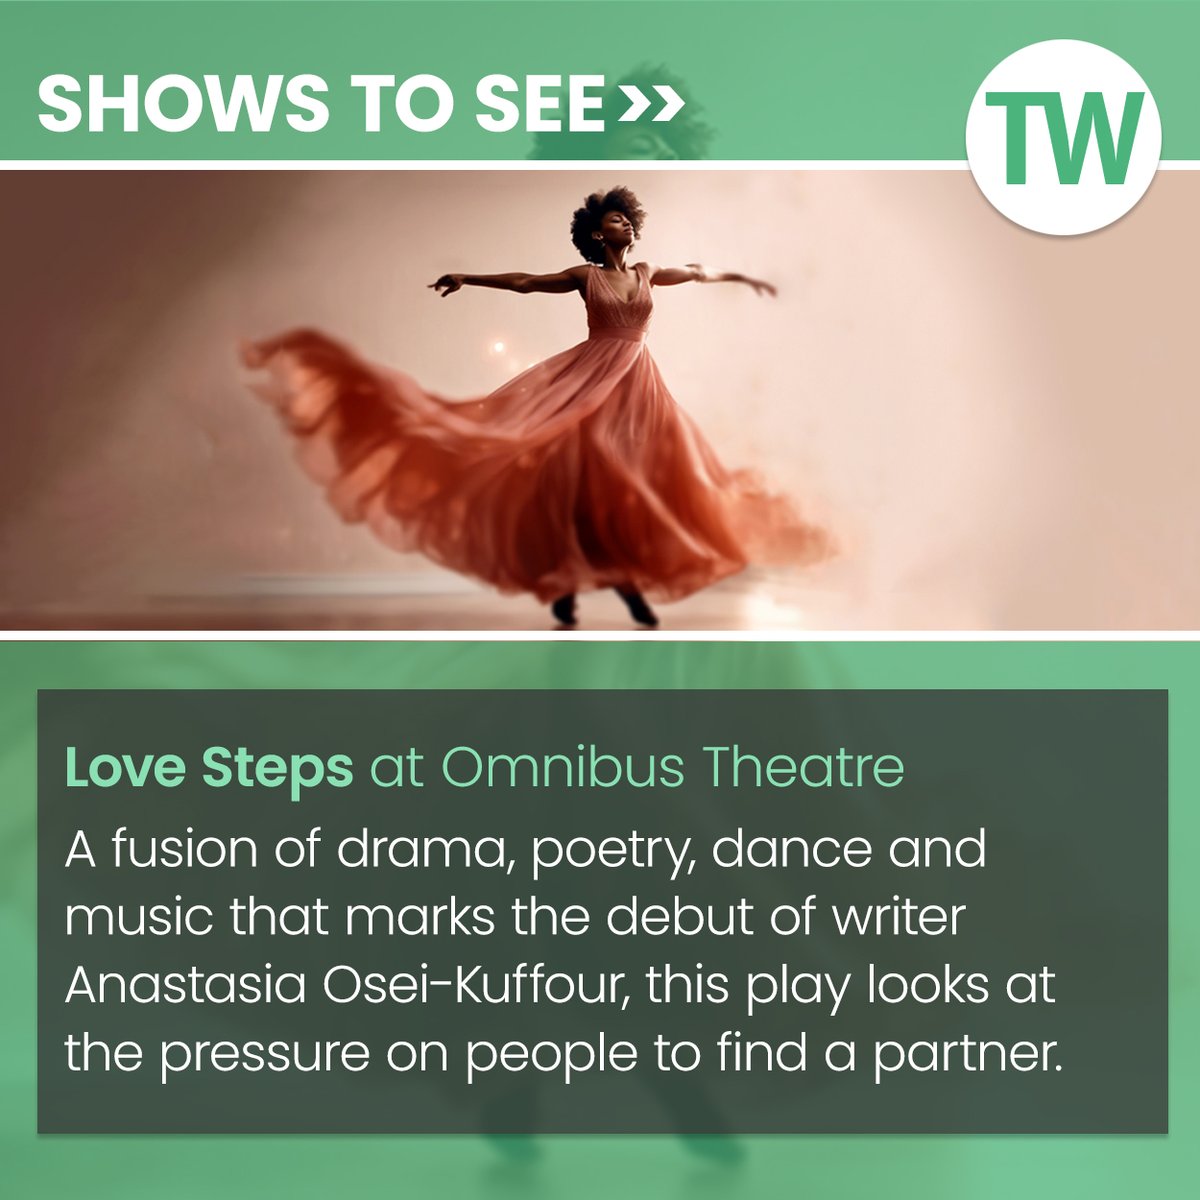 Among our recommended shows to see this week: ‘Love Steps’ at Omnibus Theatre. Get more show tips here: bit.ly/3xeLRZ7 @OmnibusTheatre @AnastasiaOseiK